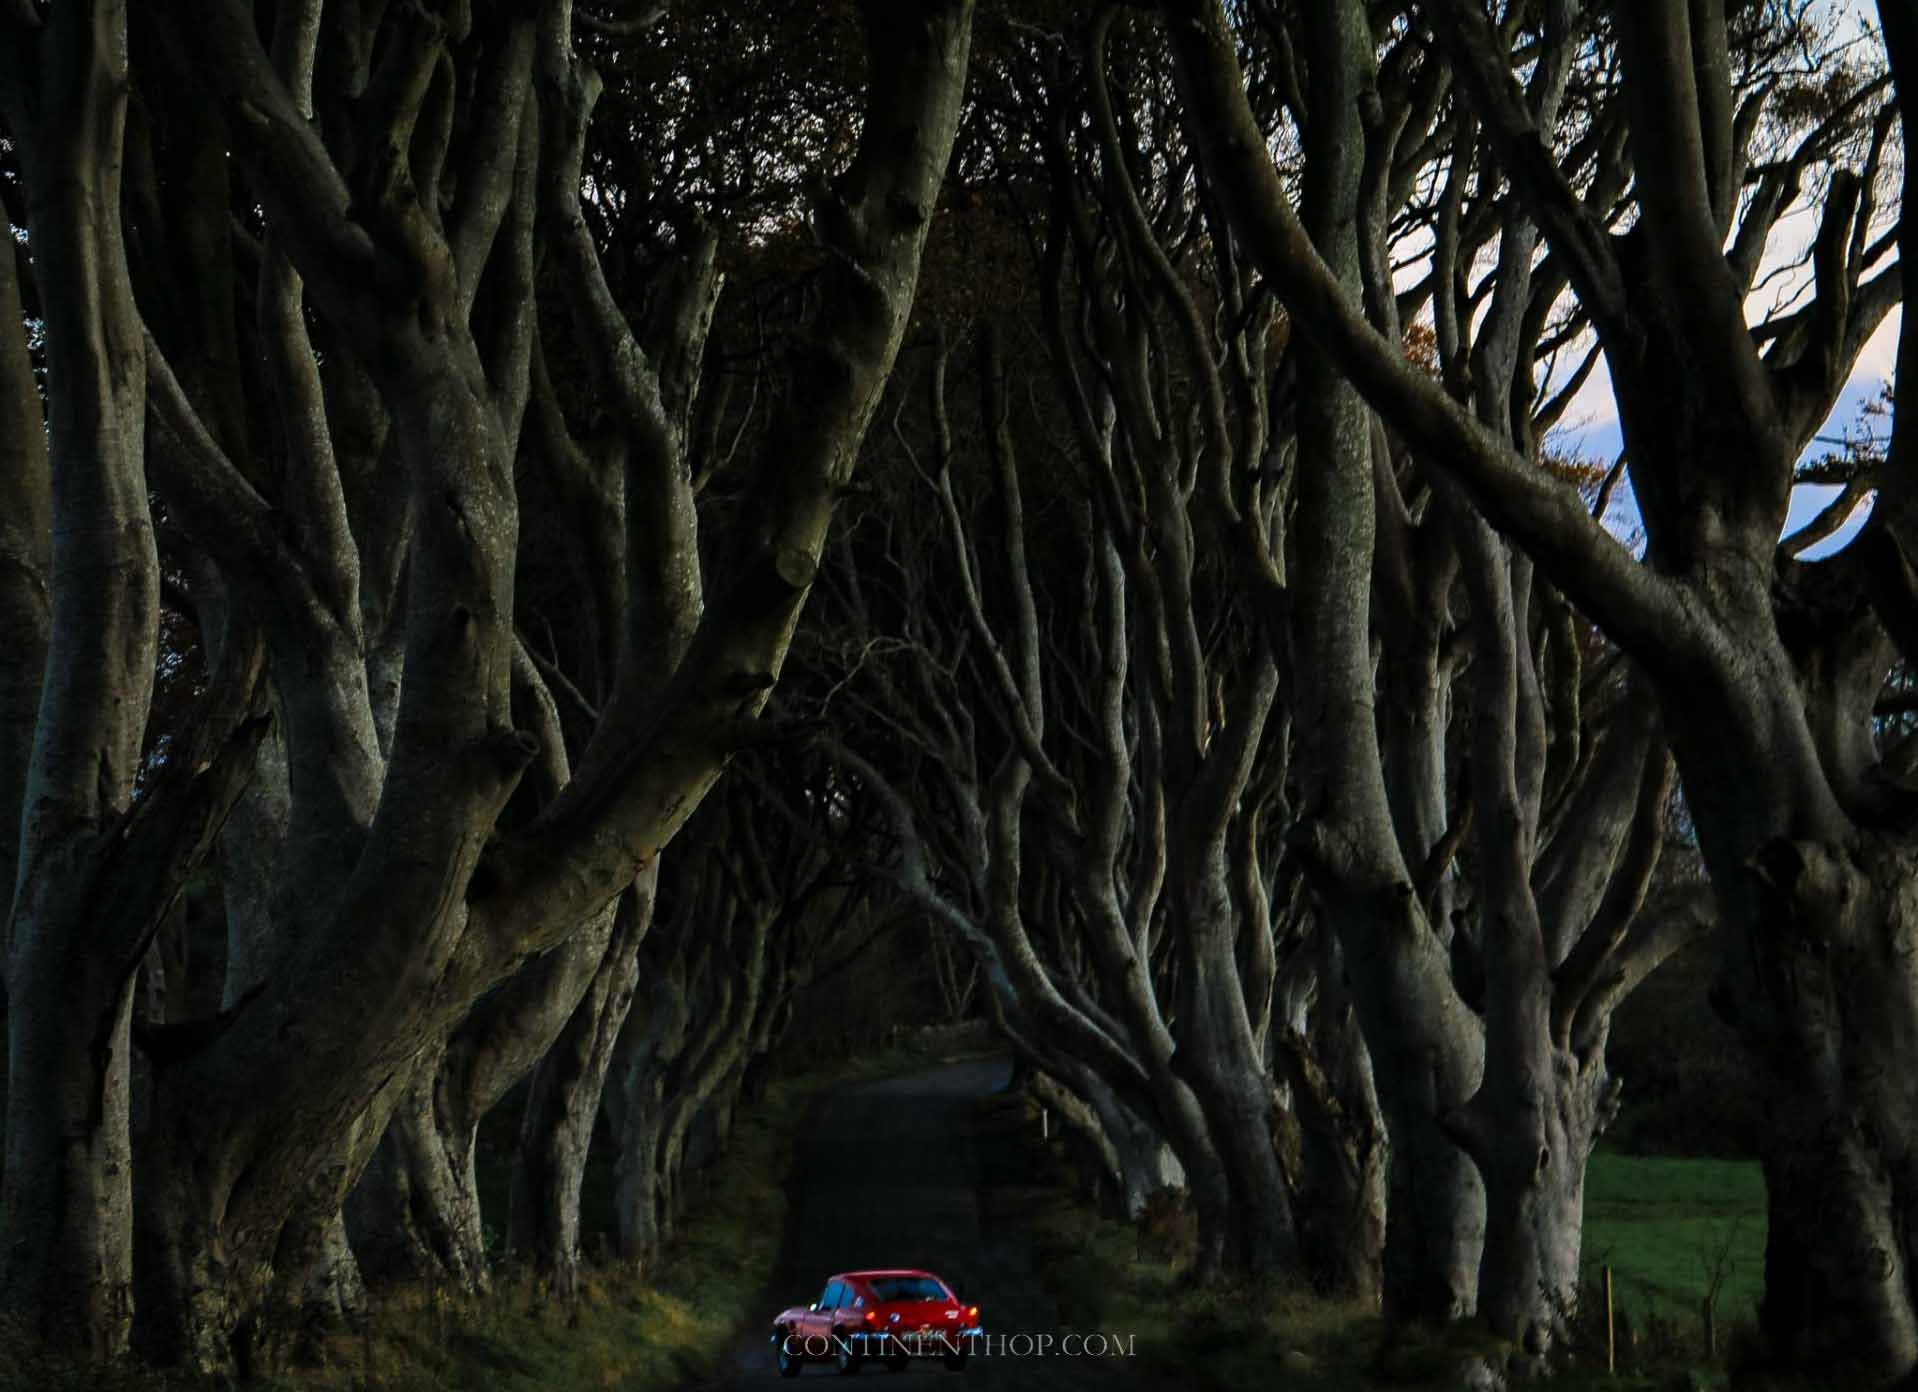 A red car inside the dark hedges in Northern Ireland Game of Thrones Locations